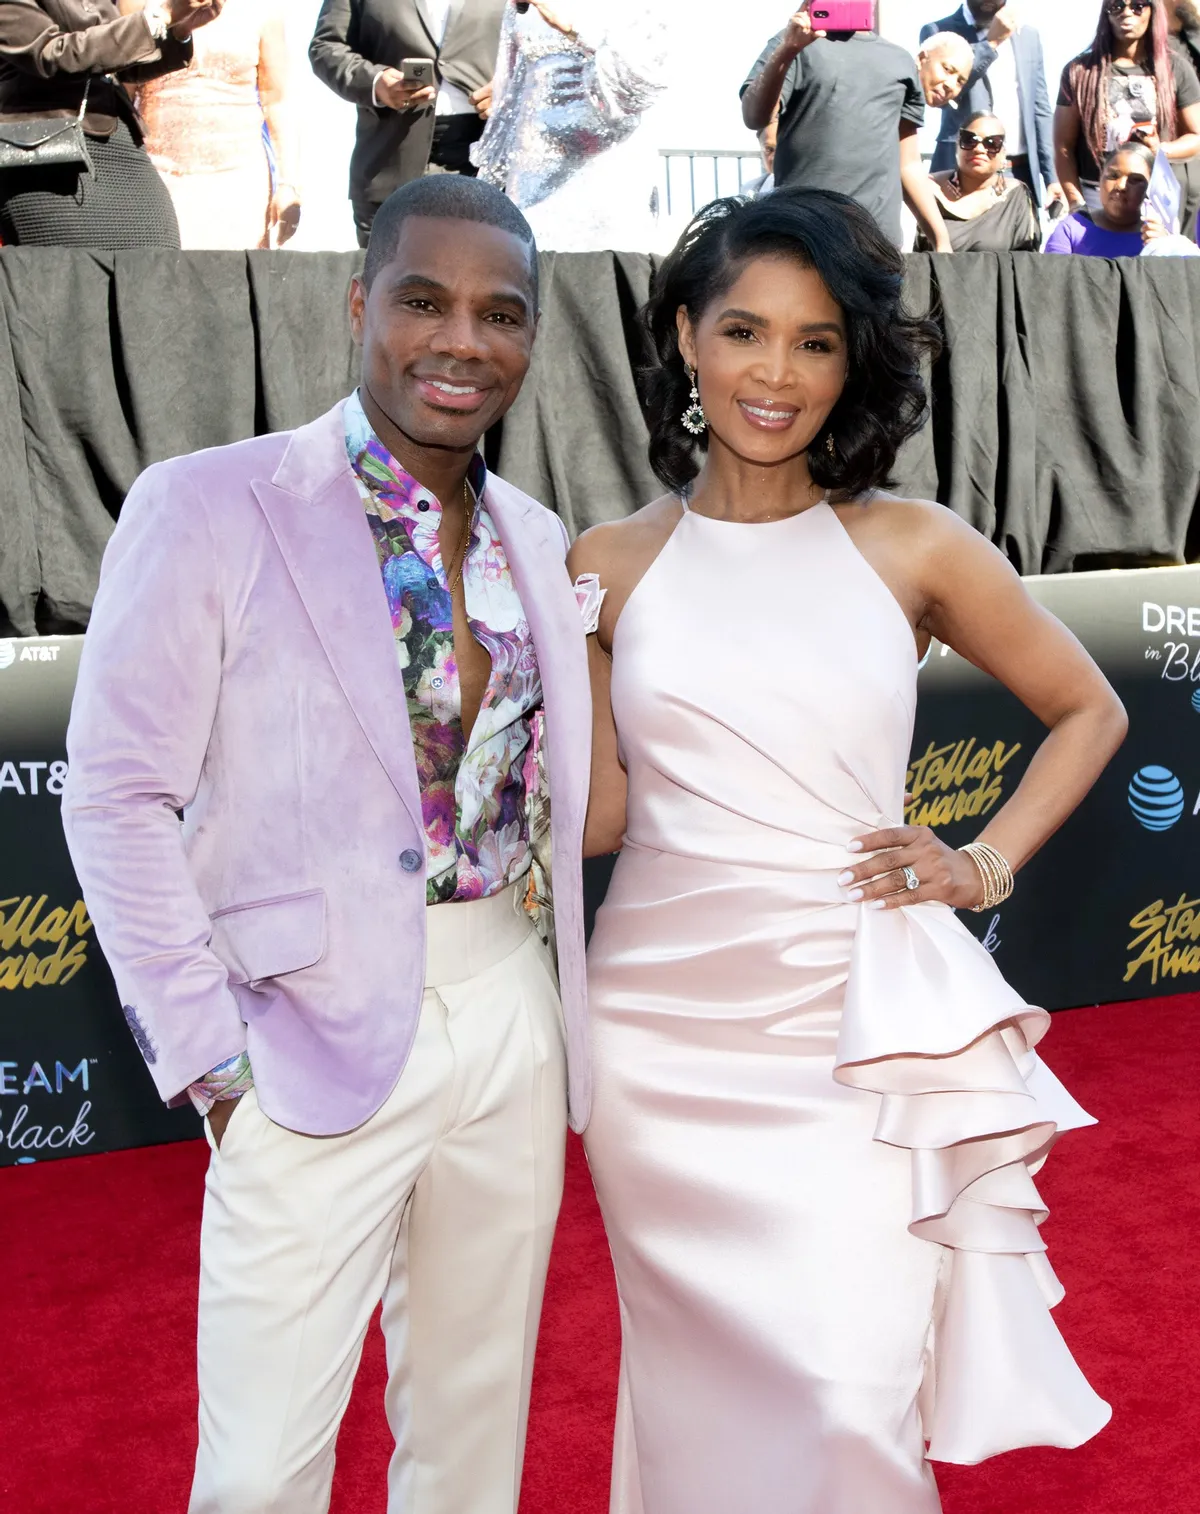 Kirk Franklin and his wife Tammy Collins at the 34th annual Stellar Gospel Music Awards on March 29, 2019 in Las Vegas, Nevada. | Photo: Getty Images